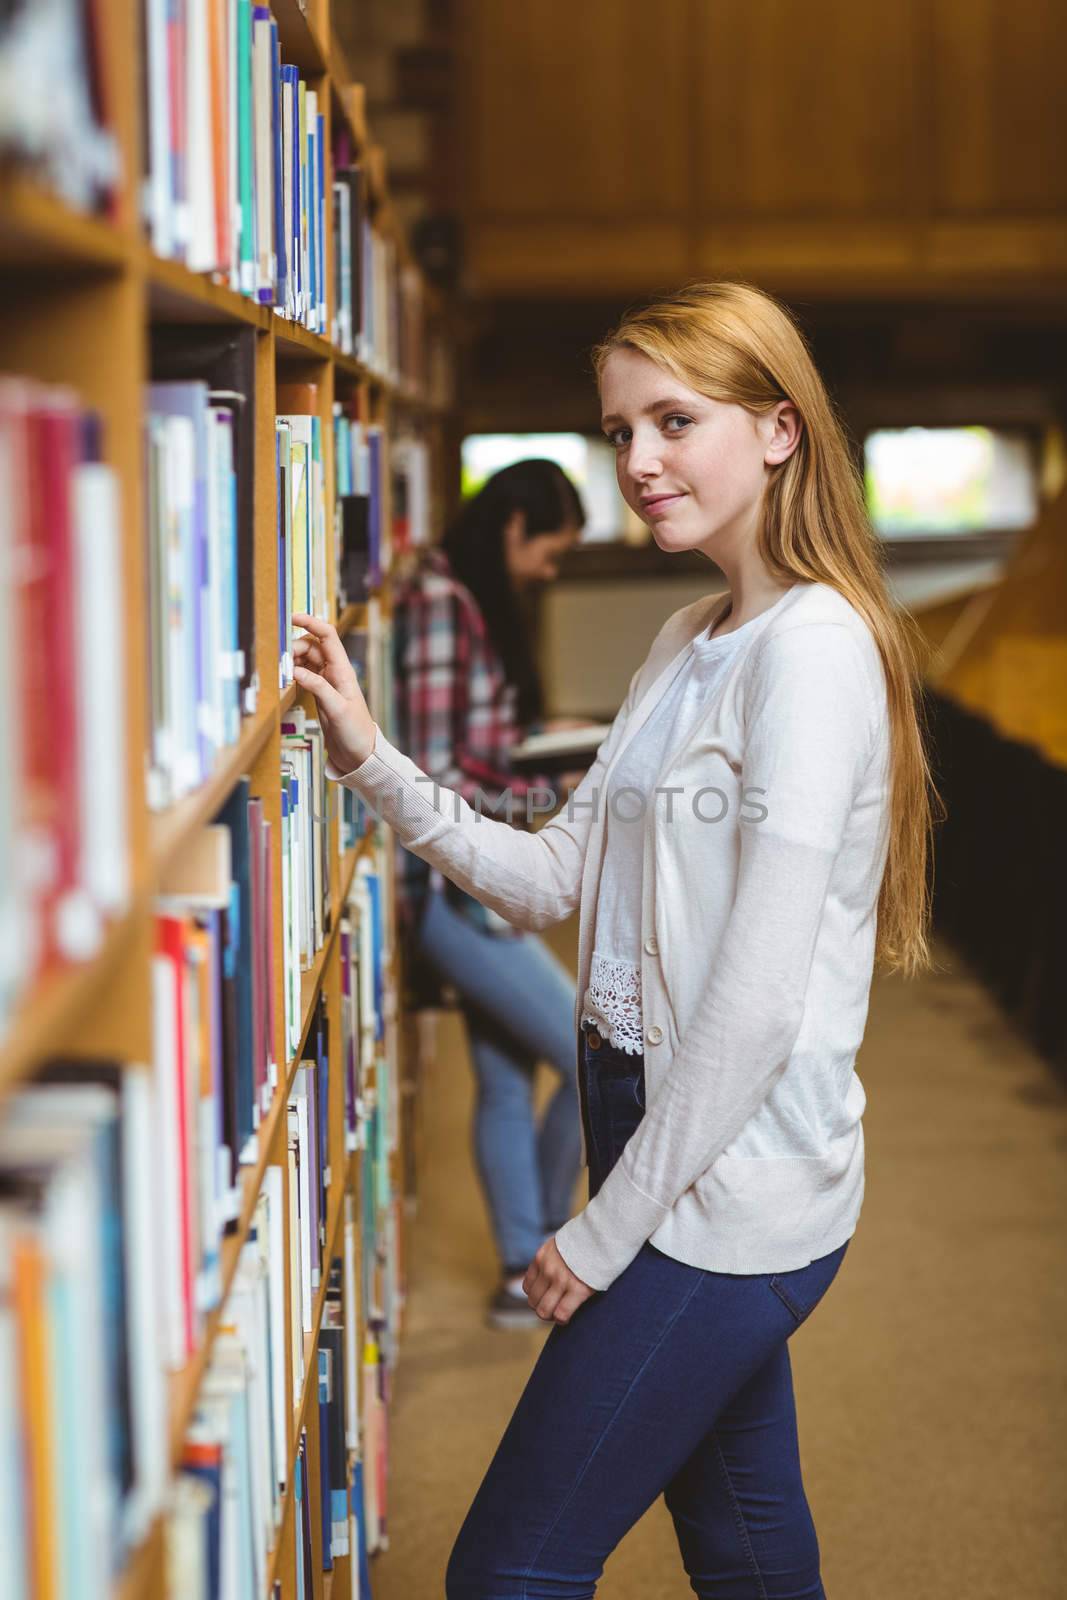 Blond student looking for book in library shelves at the university